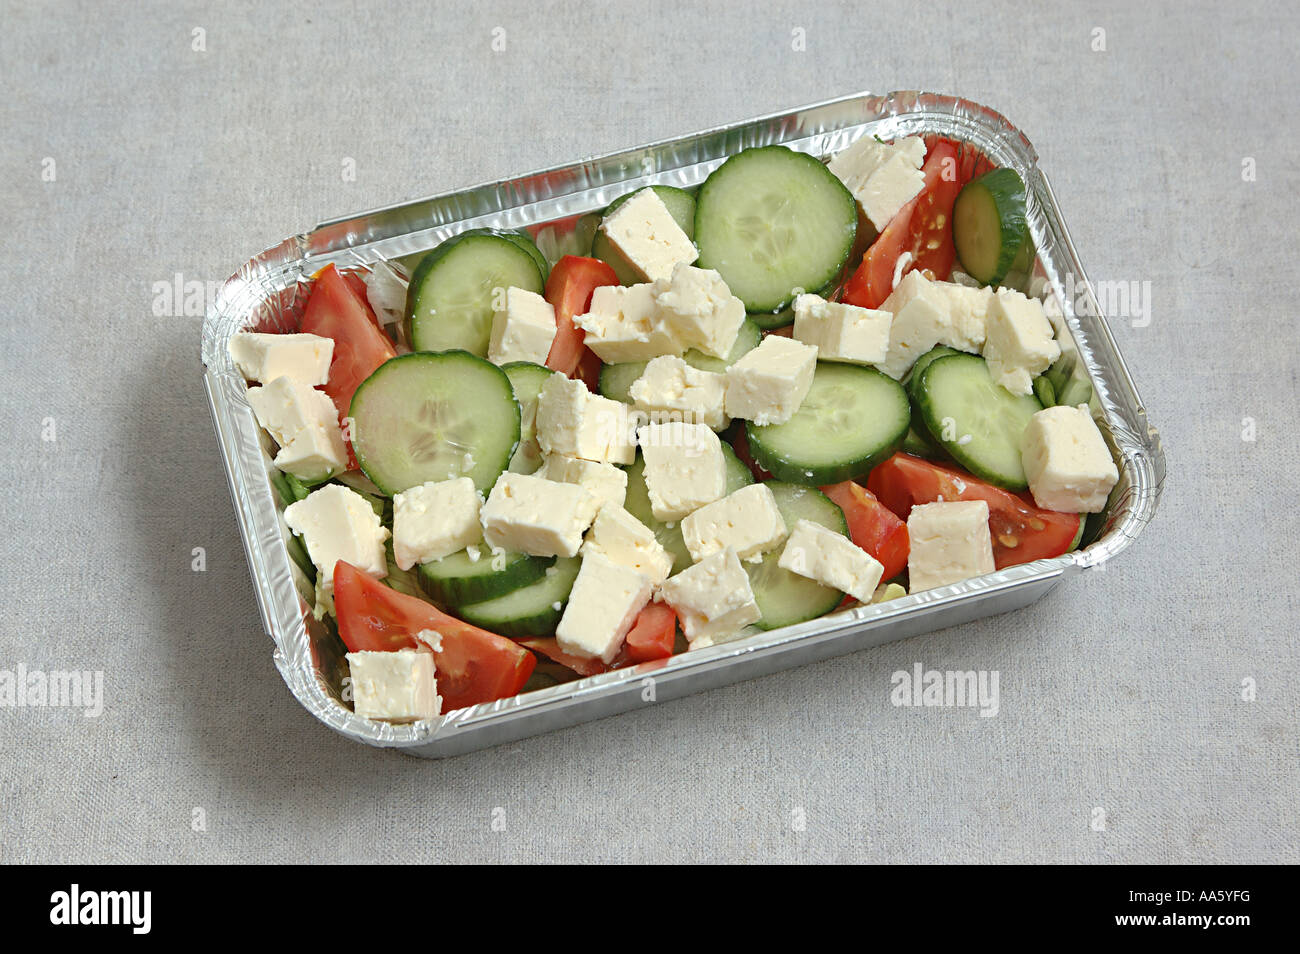 ANG103757 Salad Slices of Cucumber Tomatoes Iceberg salad chopped and cheese kept in aluminum container take away food Stock Photo